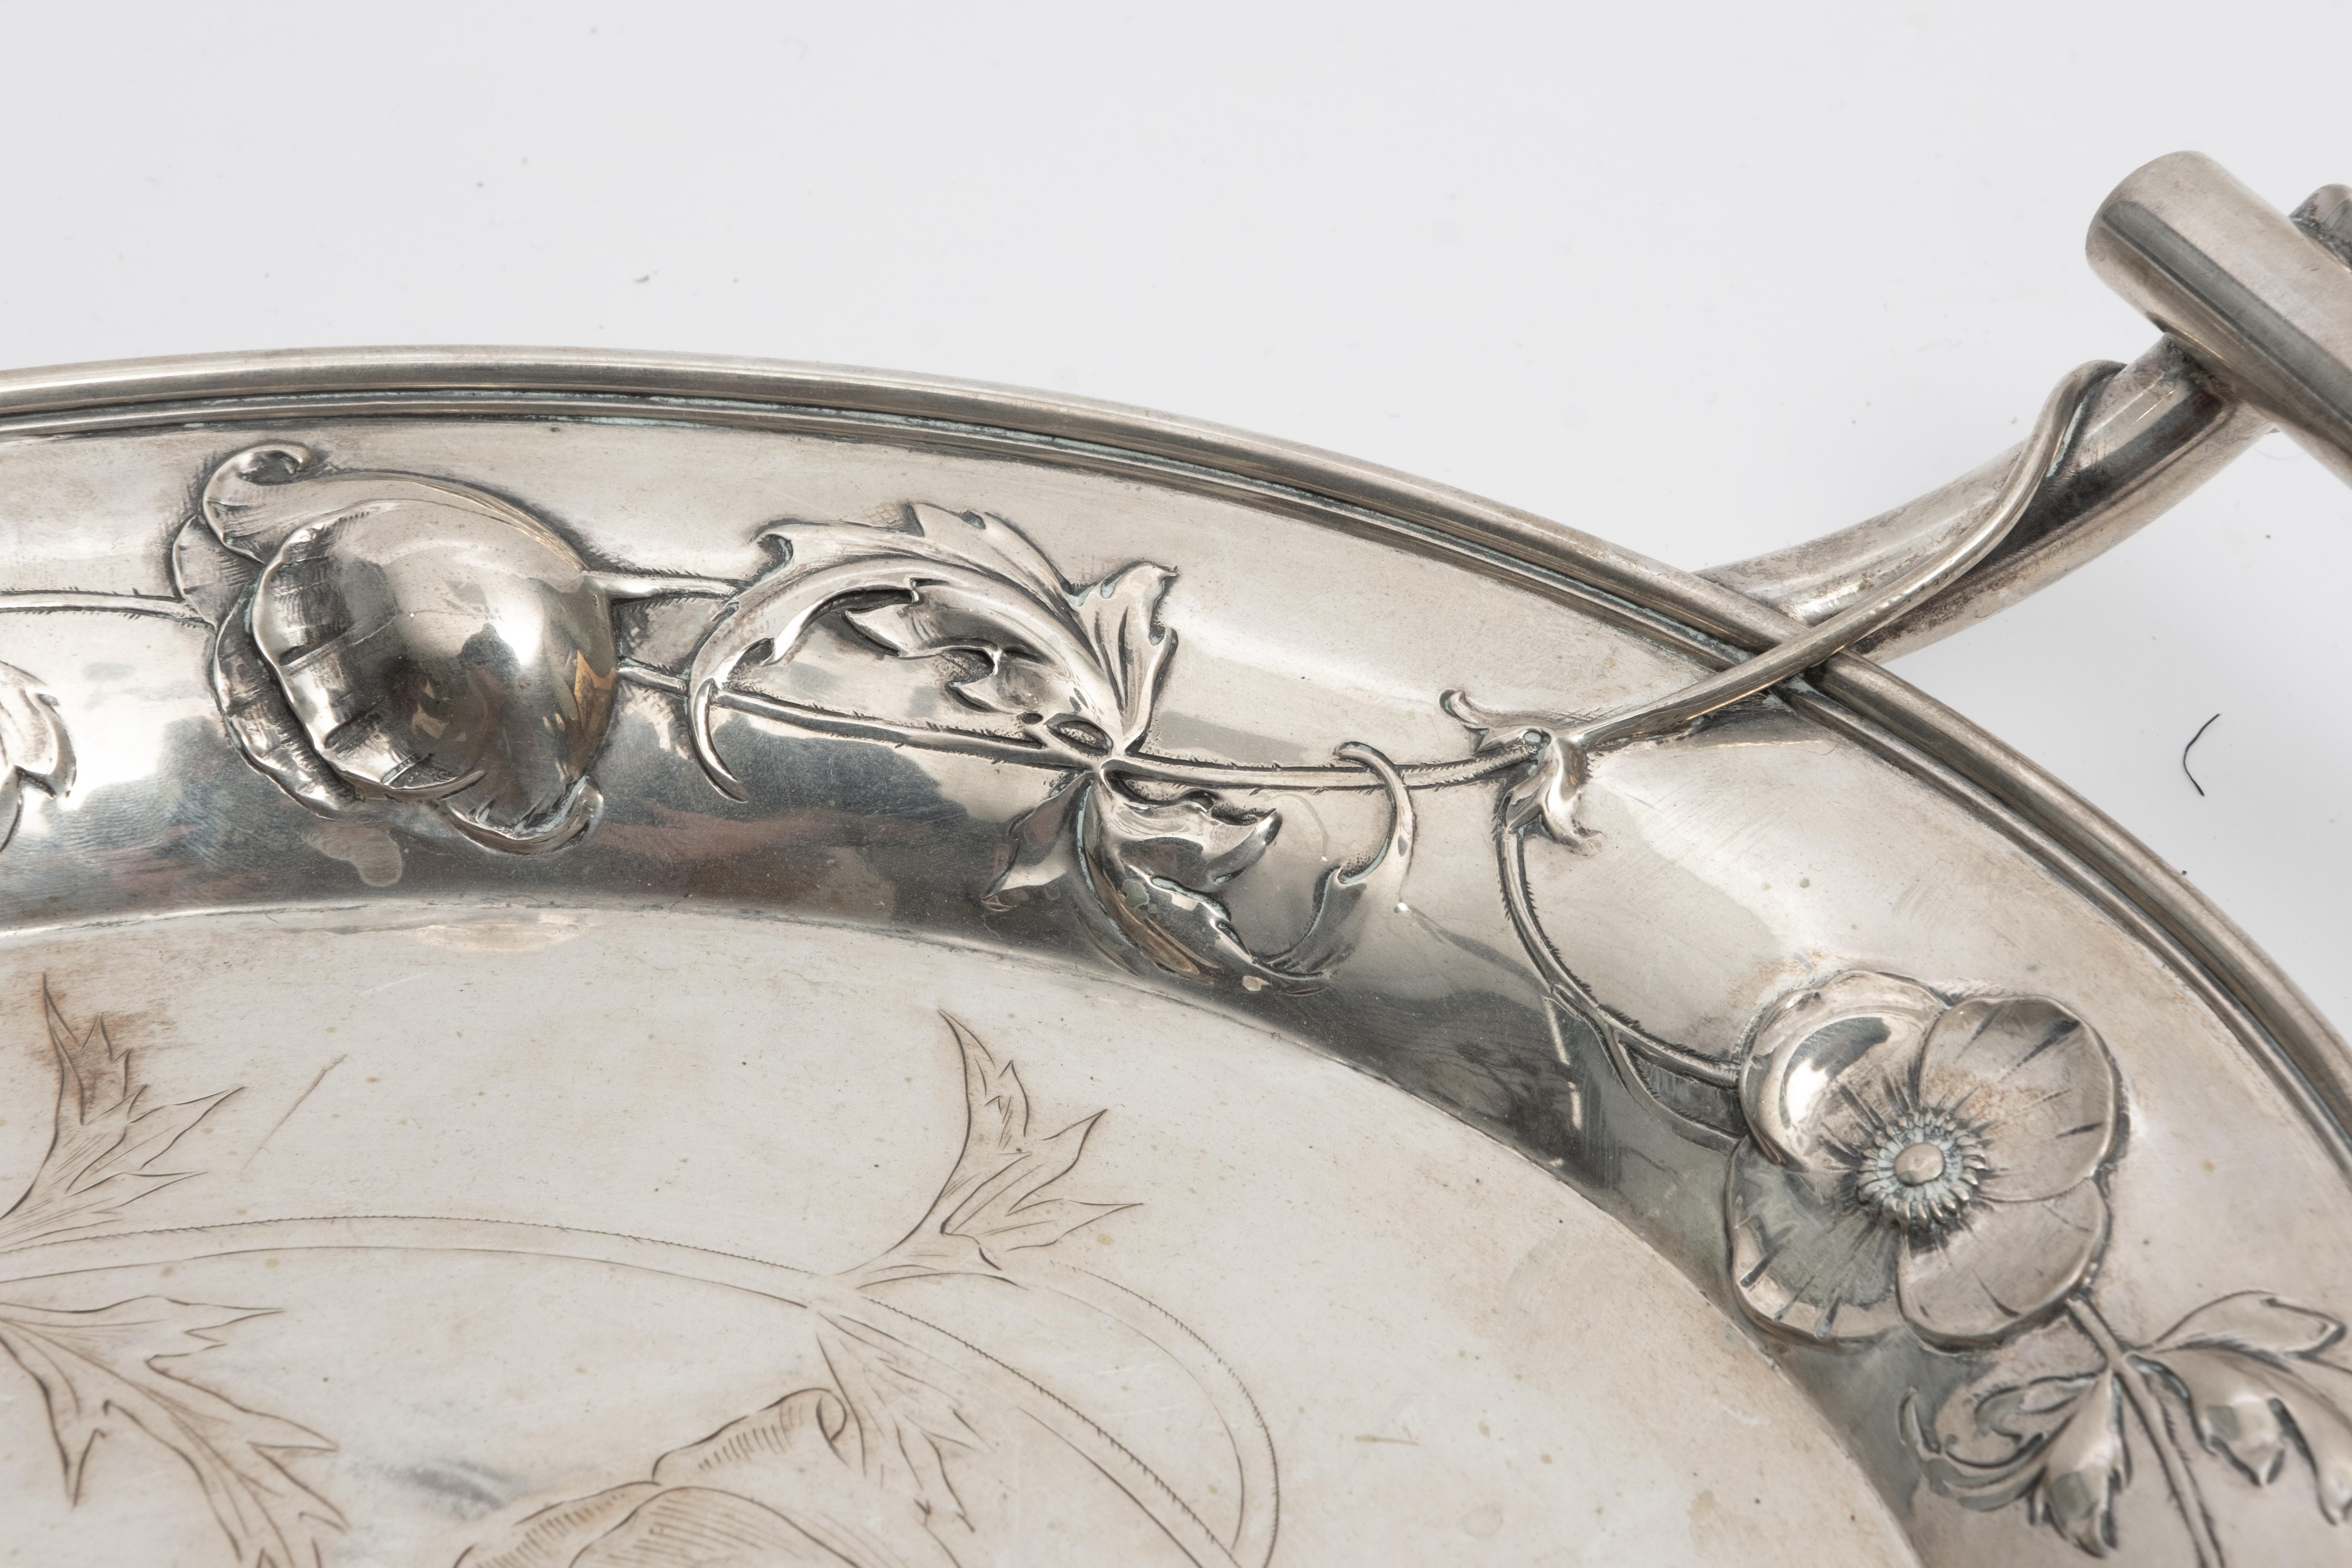 W. Stuttgen German art nouveau silver tray with double handles and oval form, finished with etched floral motifs. Hallmarked: 